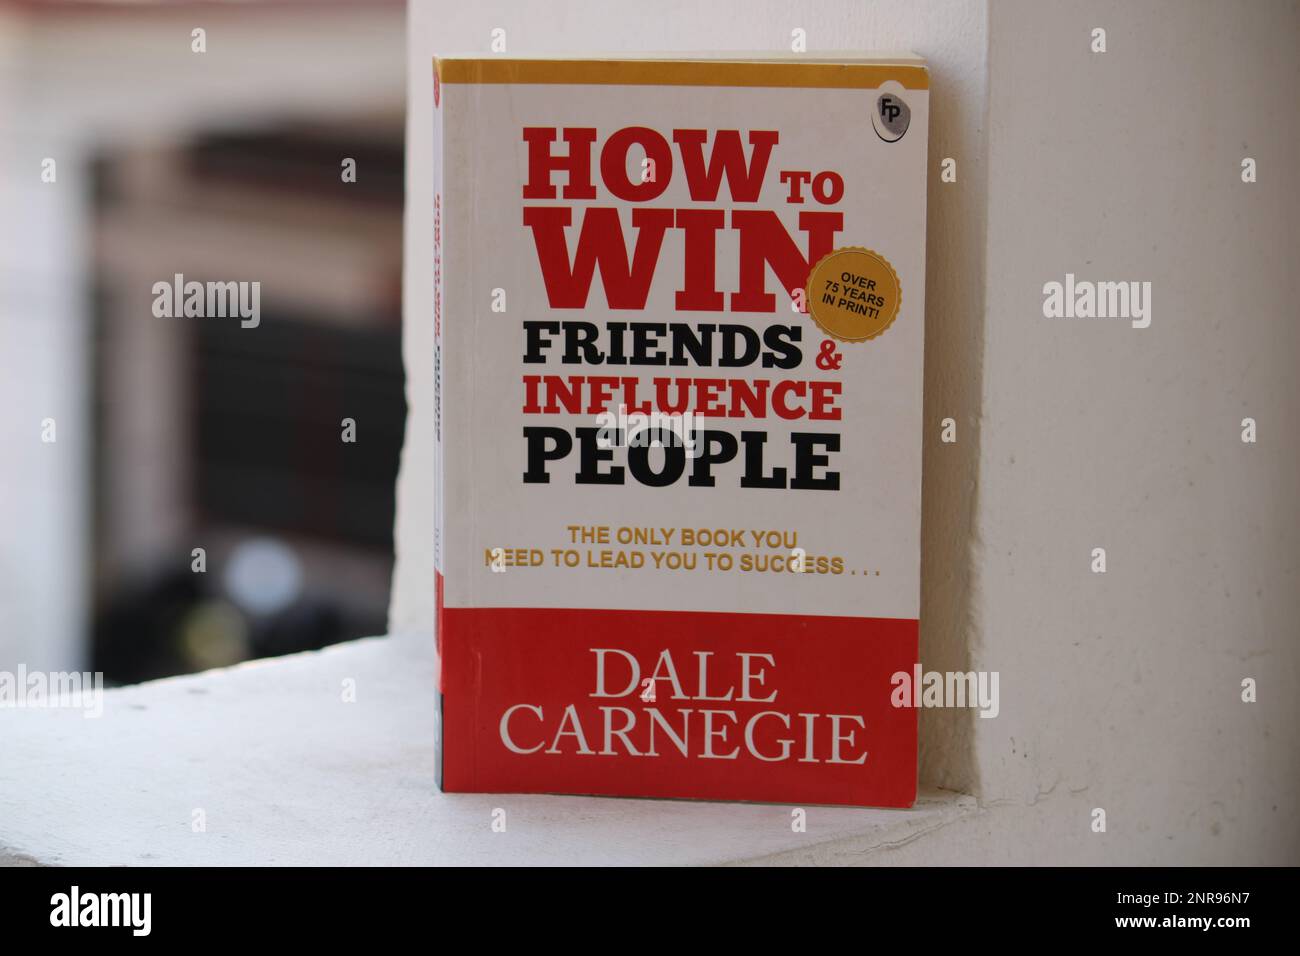 How to win friends and influence people by Dale Carnegie Stock Photo